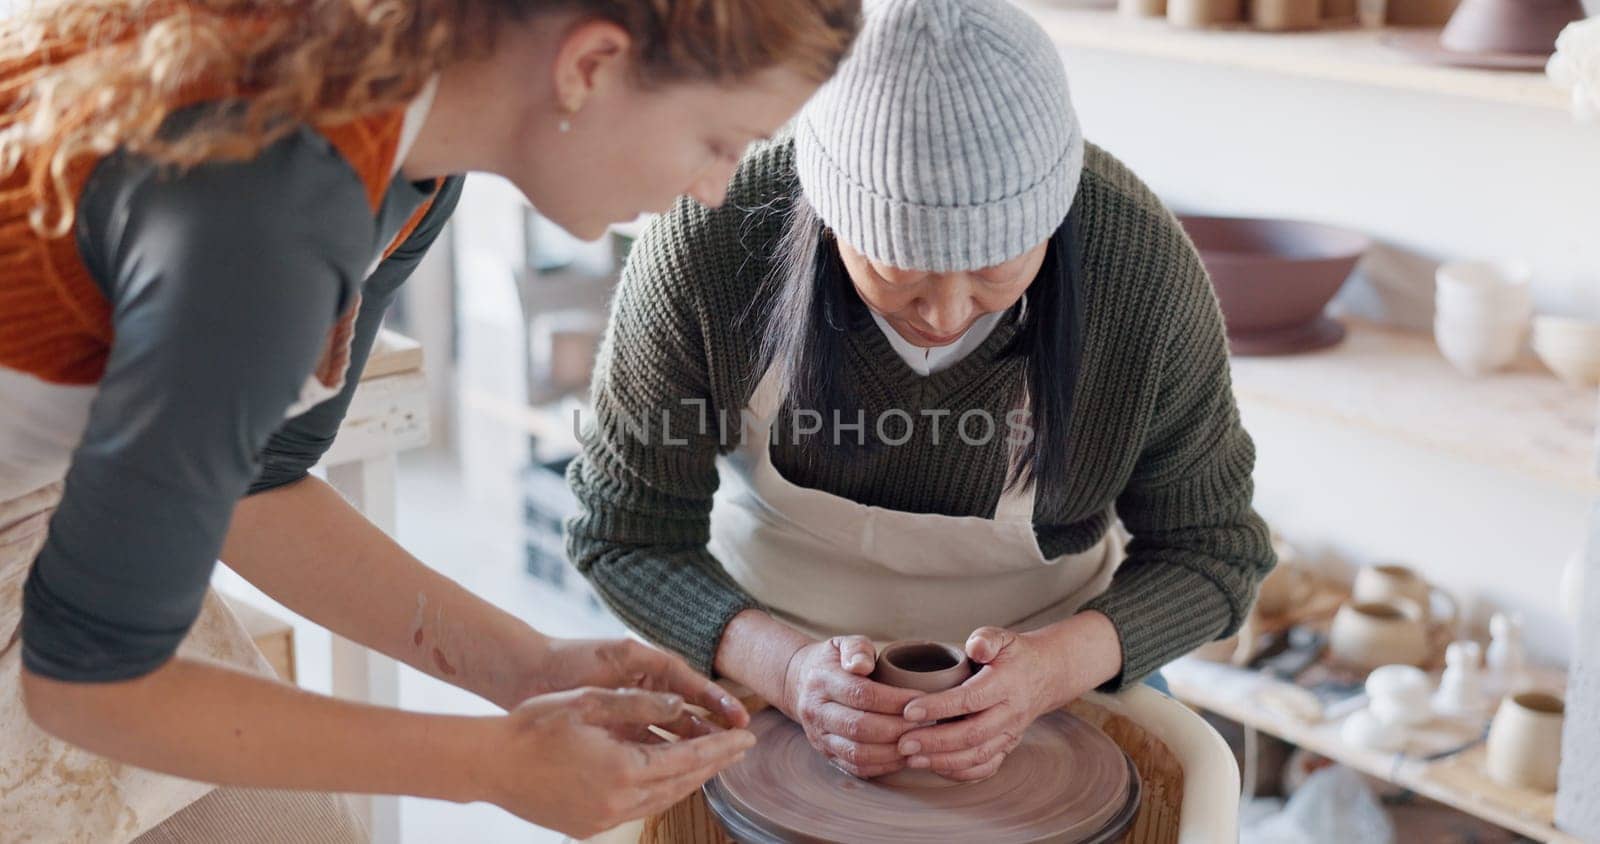 Pottery teacher, studio and workshop learning, training and teaching to seniorwoman on craft wheel for creativity, clay and sculpture process. Artist helping student in class, design and creative mol by YuriArcurs